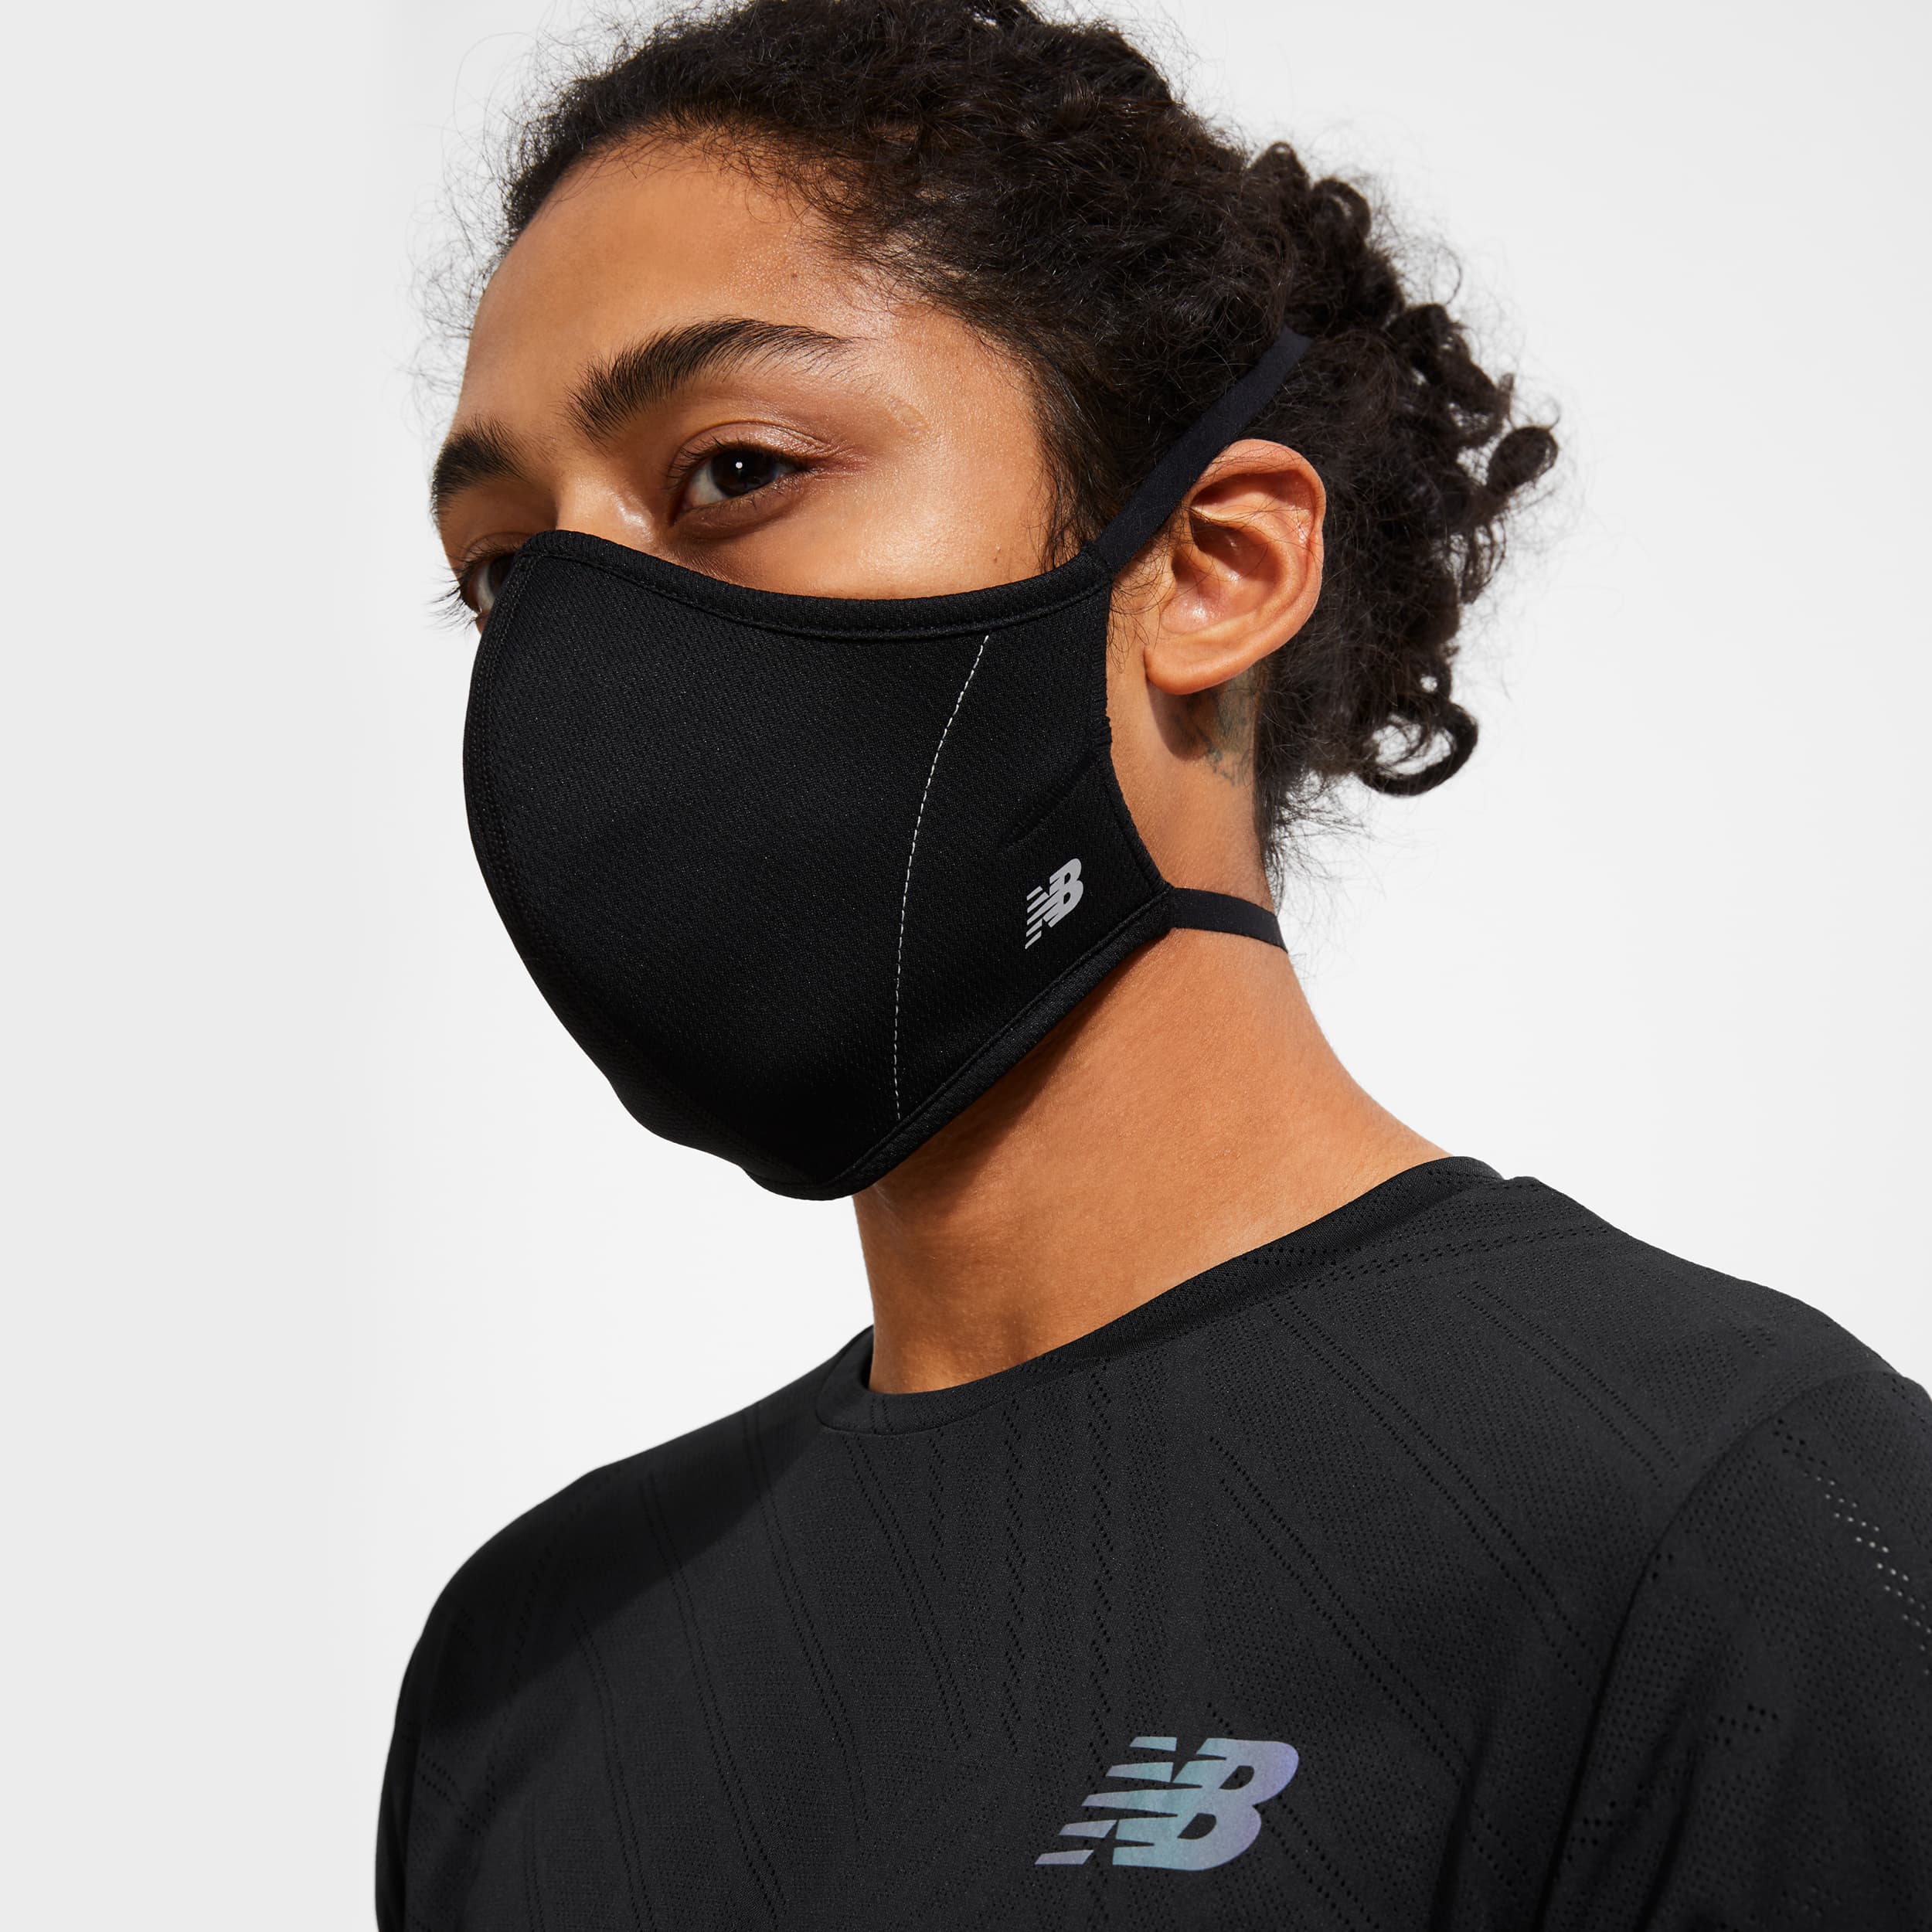 New balance performance mask released for 2021